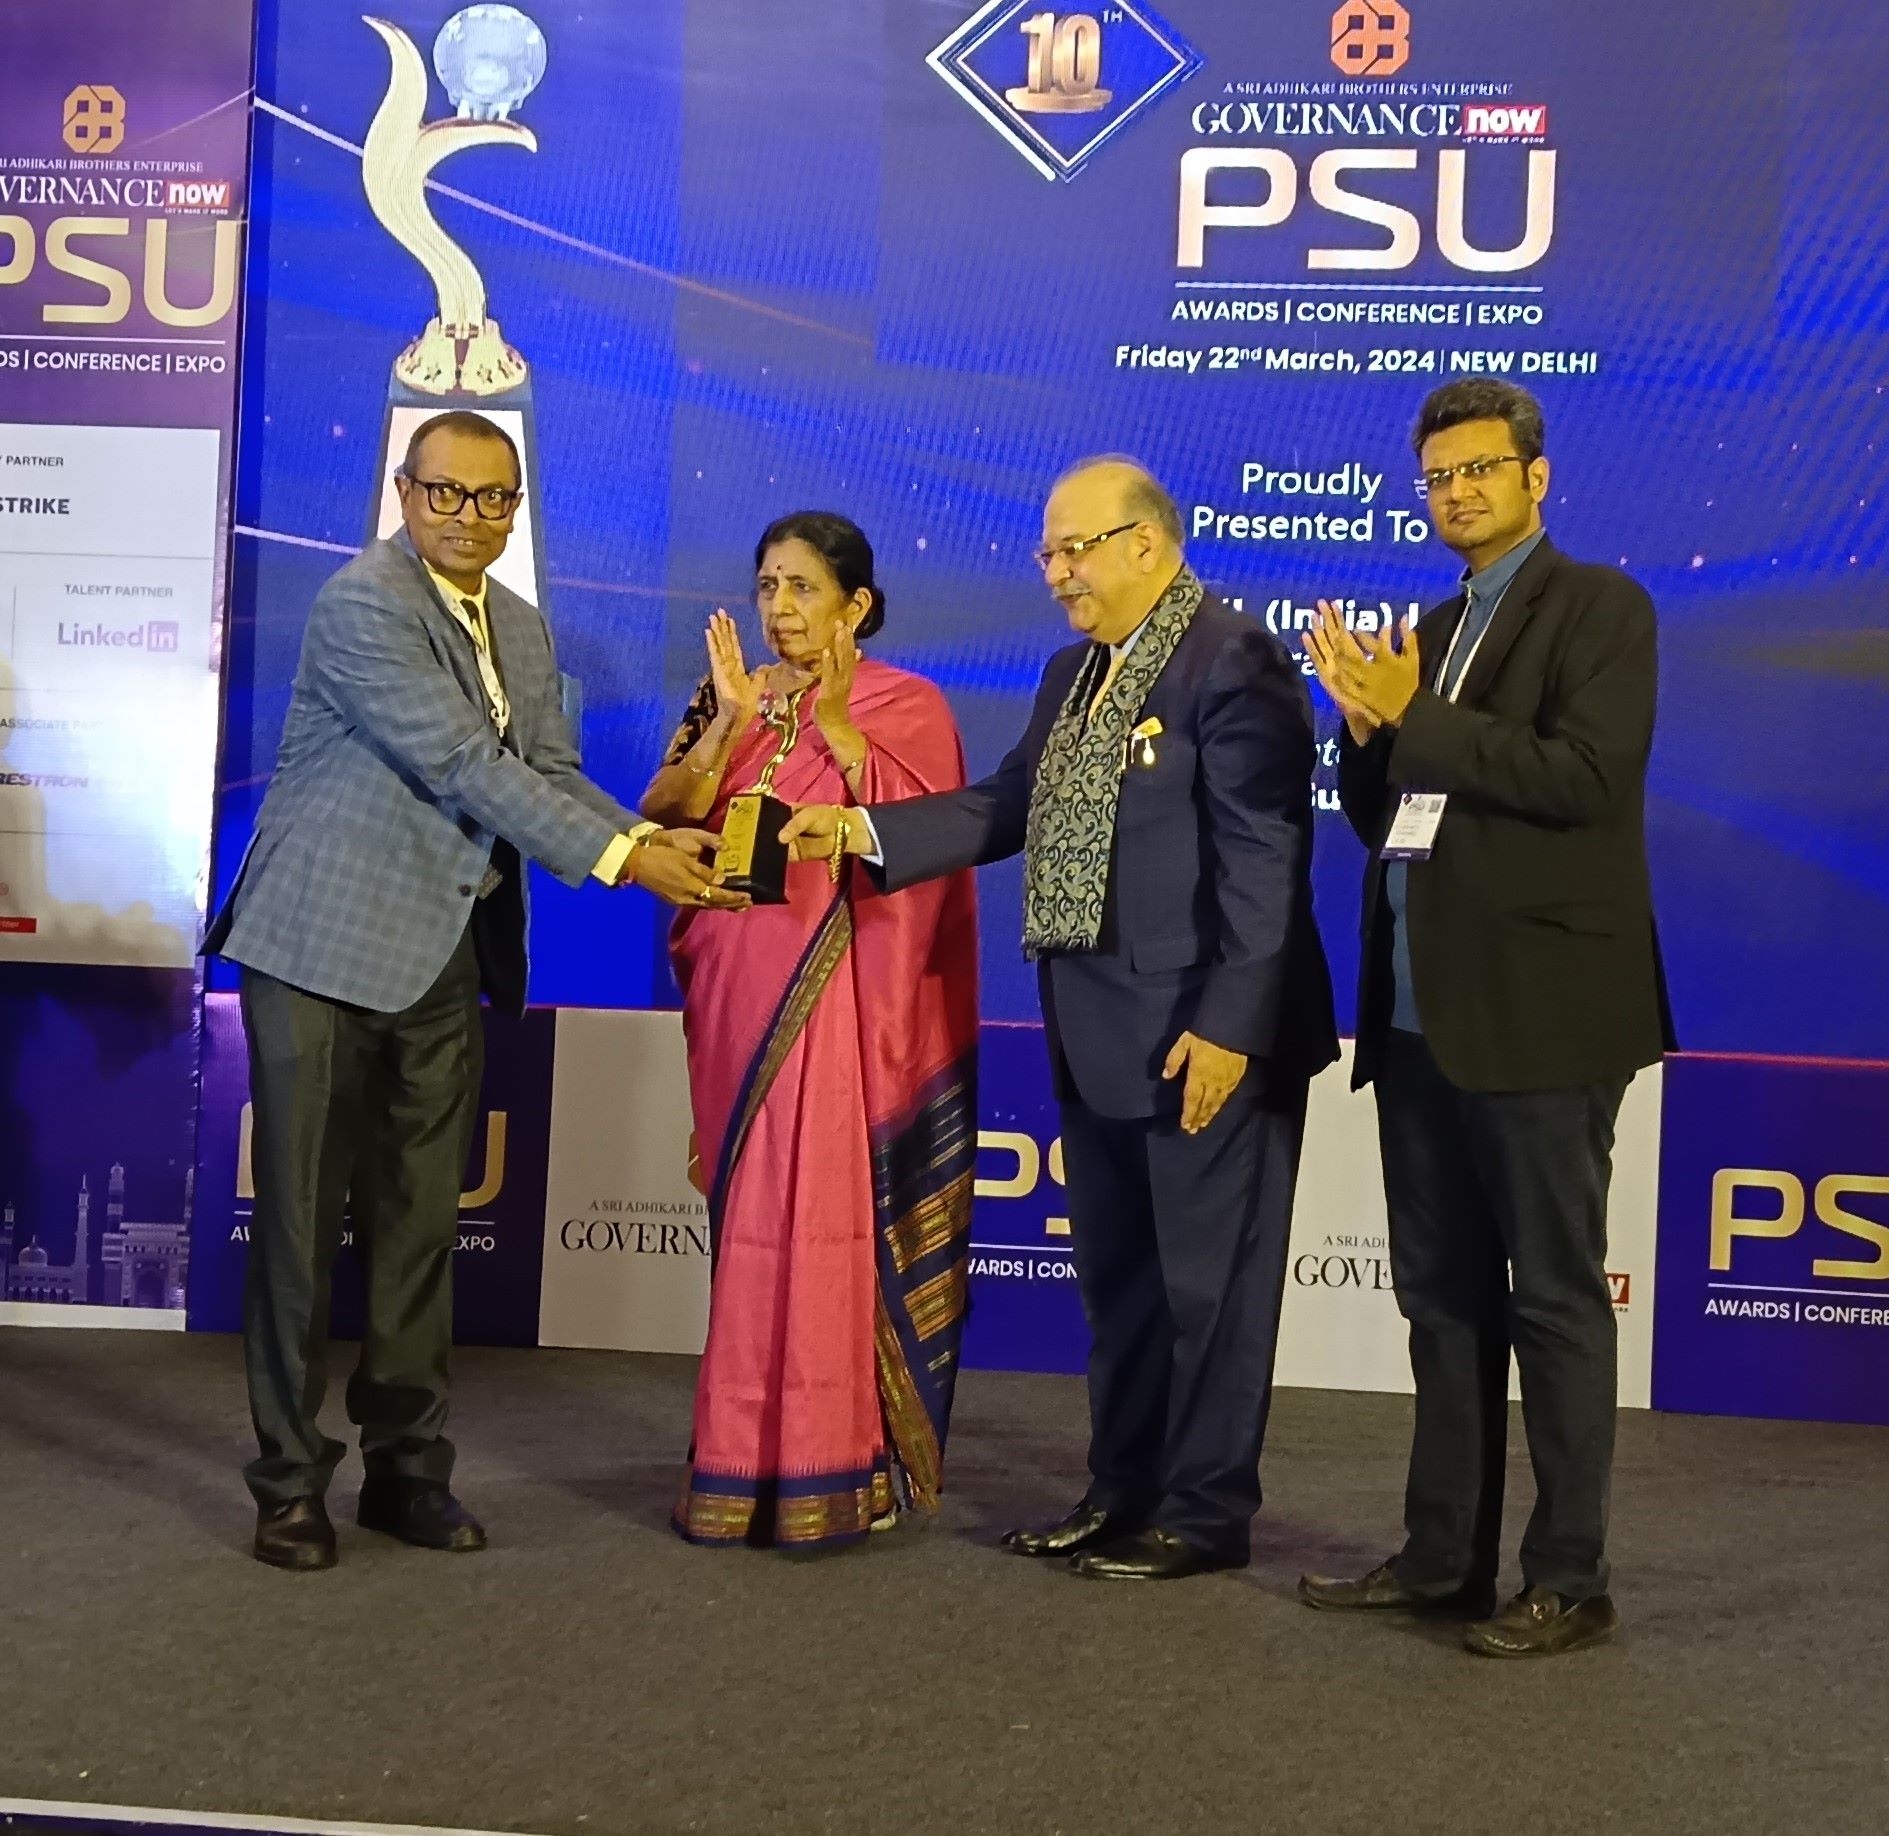 GRSE Bags Governance Now PSU Awards in 